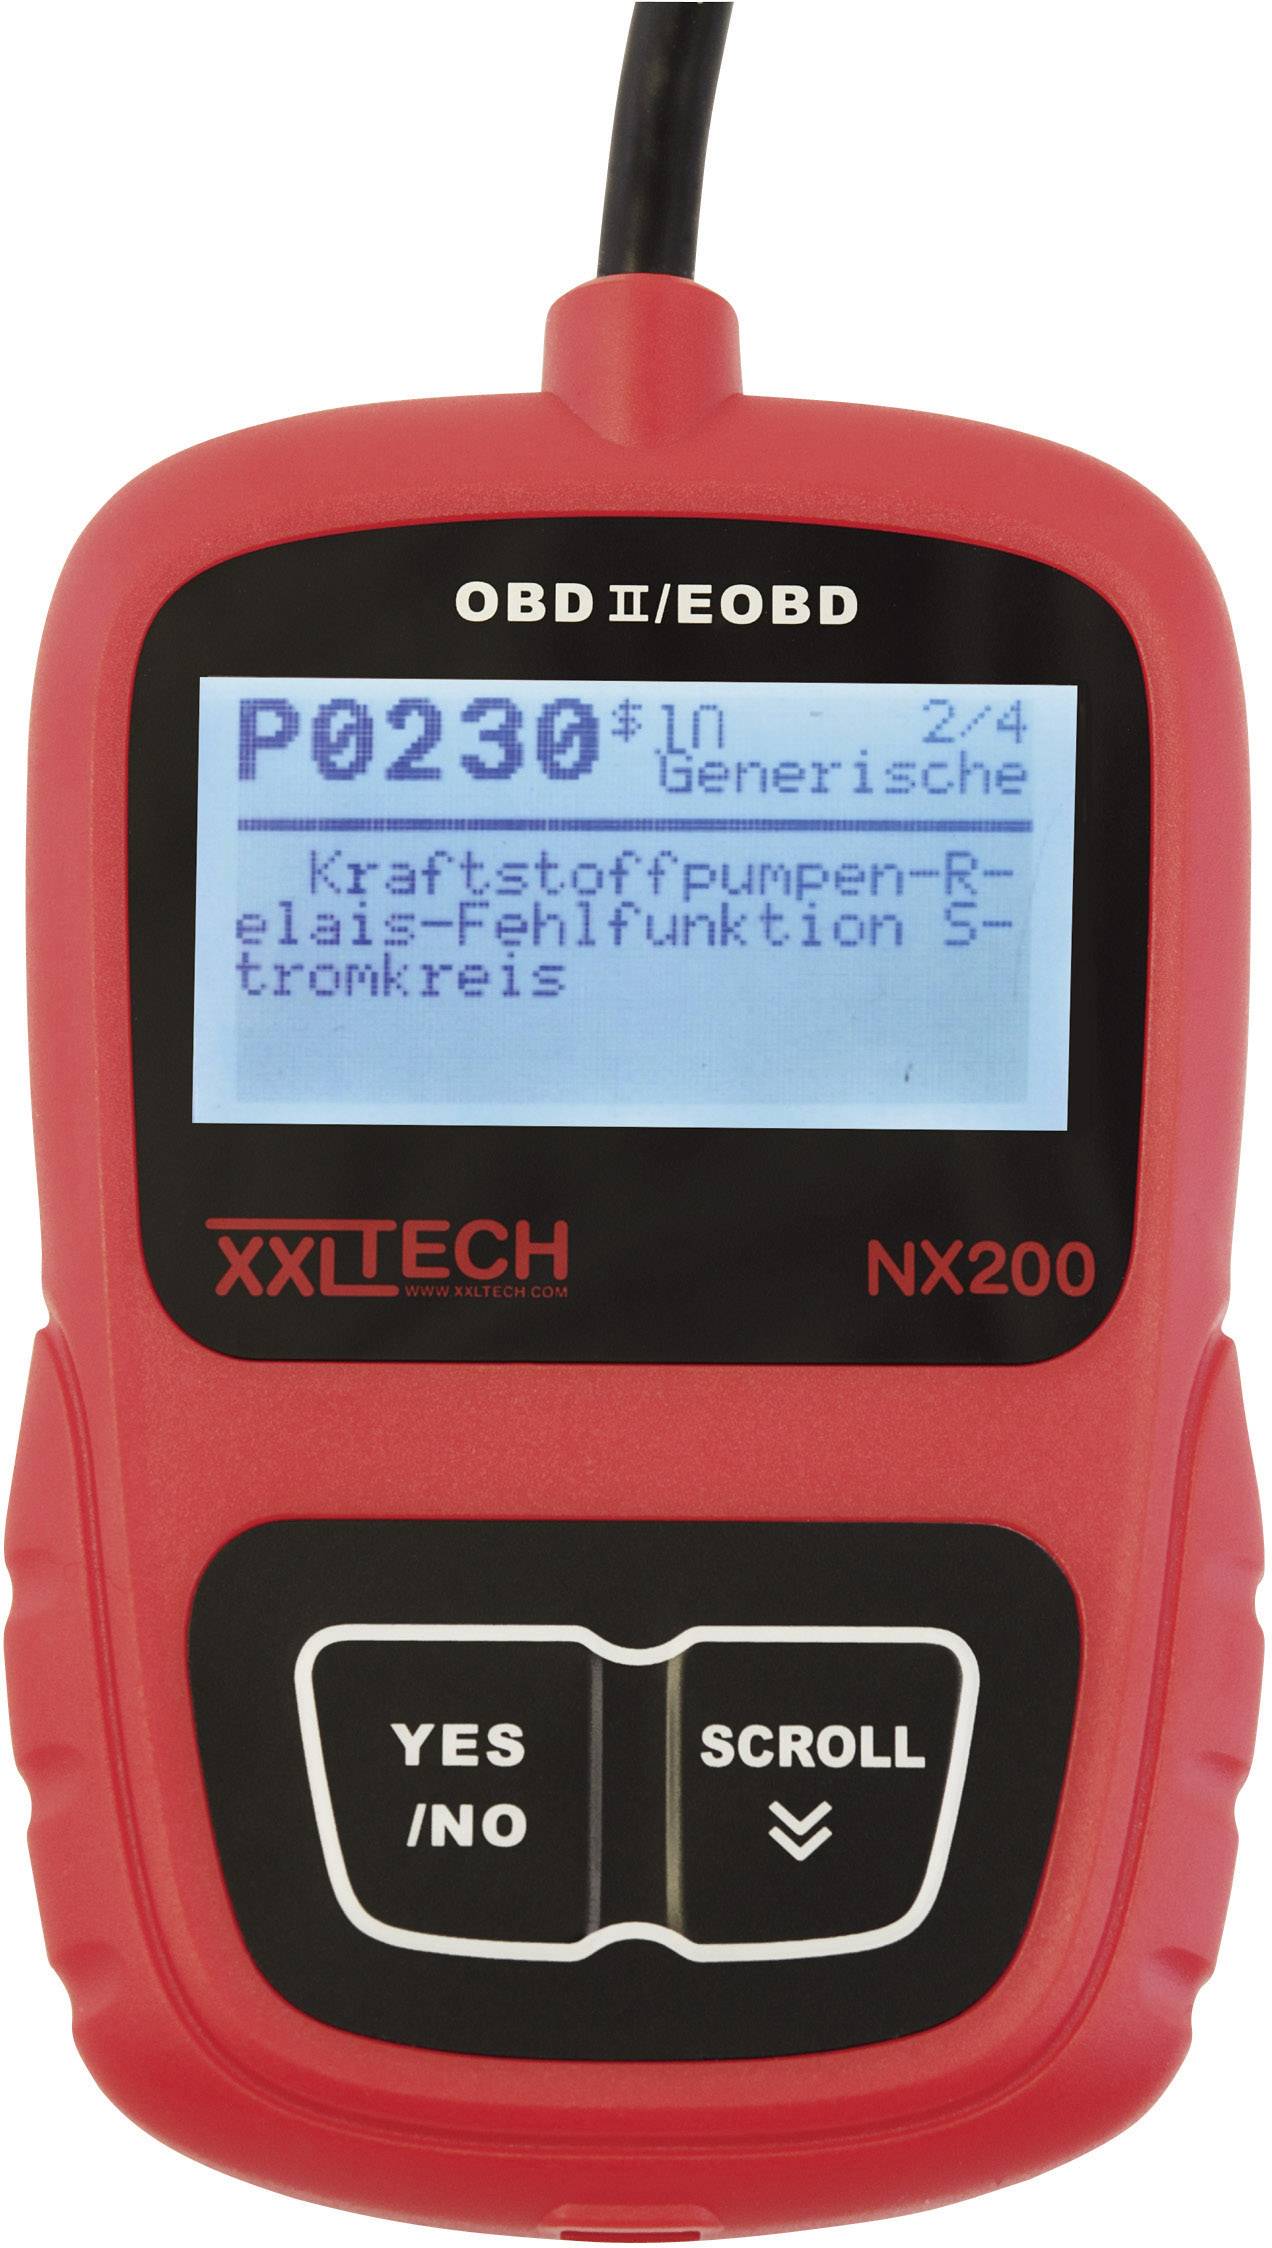 *XXLTech NX200 OBD2 OBD 2 II CAN Tester Scanner Diagnosegerät Volvo Ford Renault 